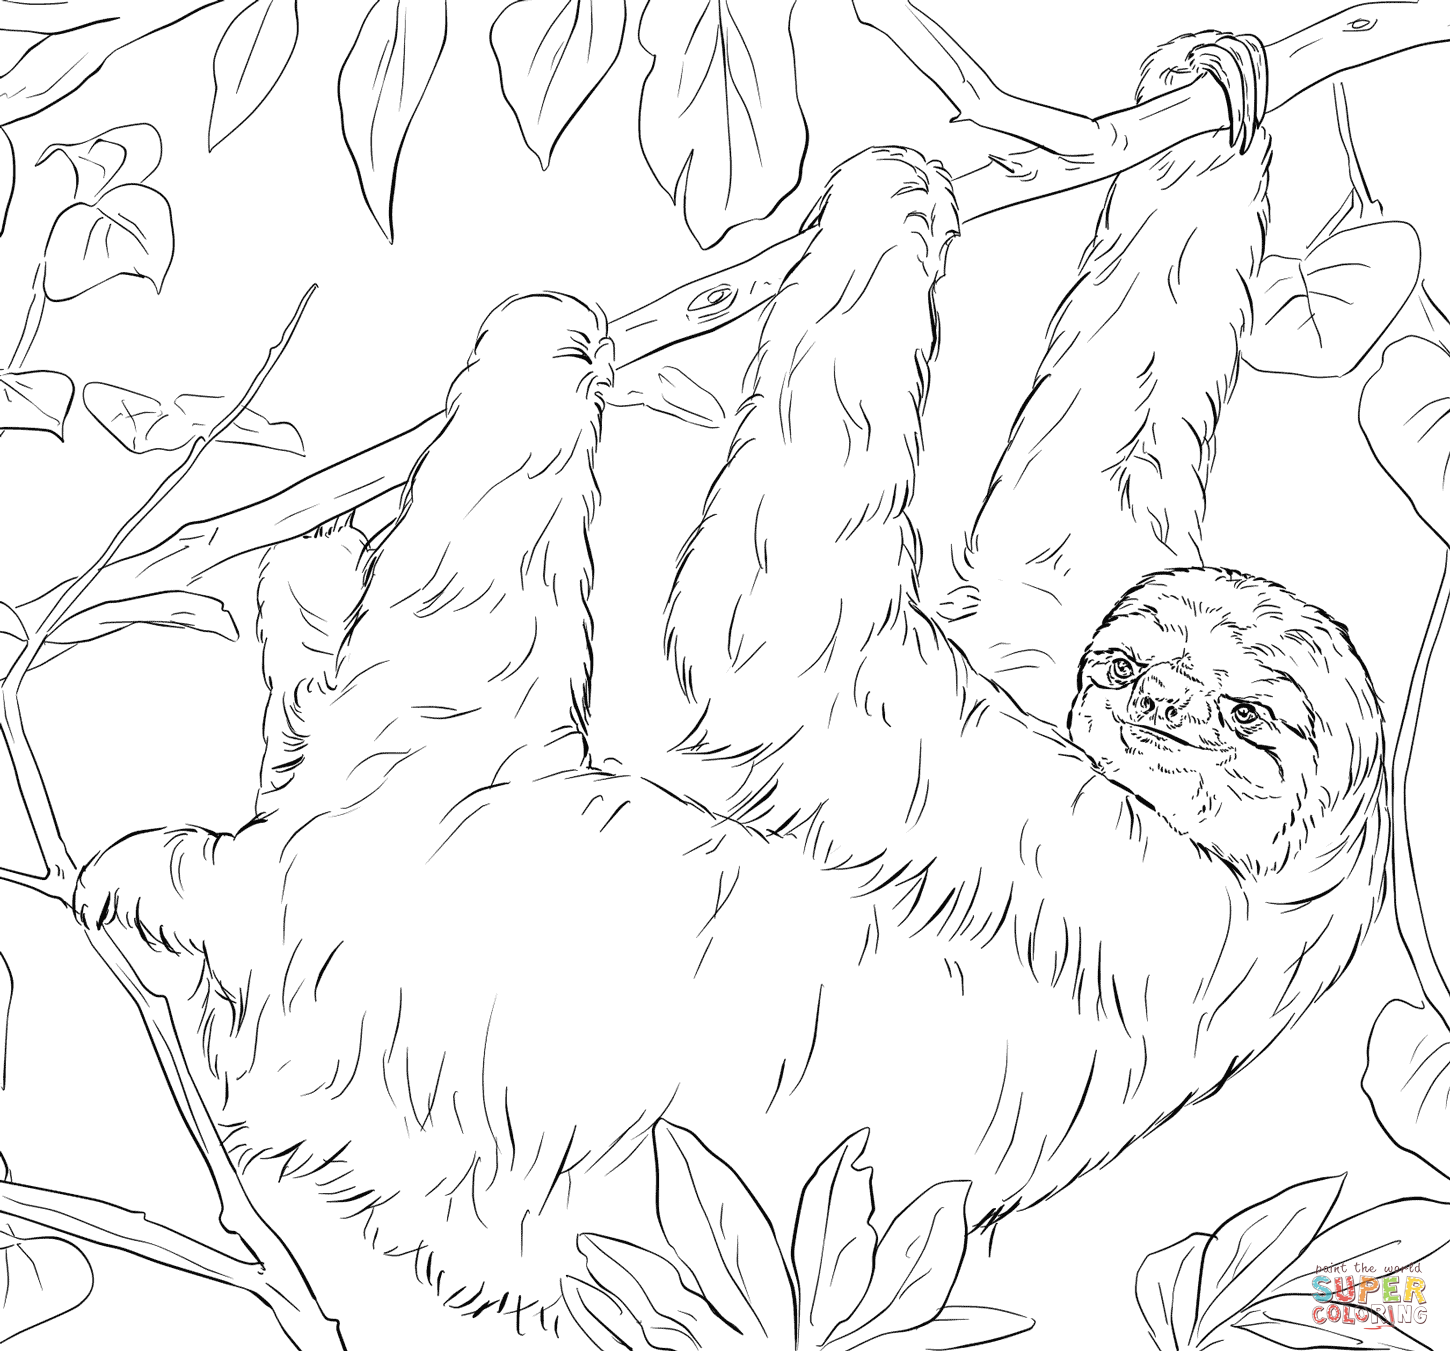 Sloth coloring page.